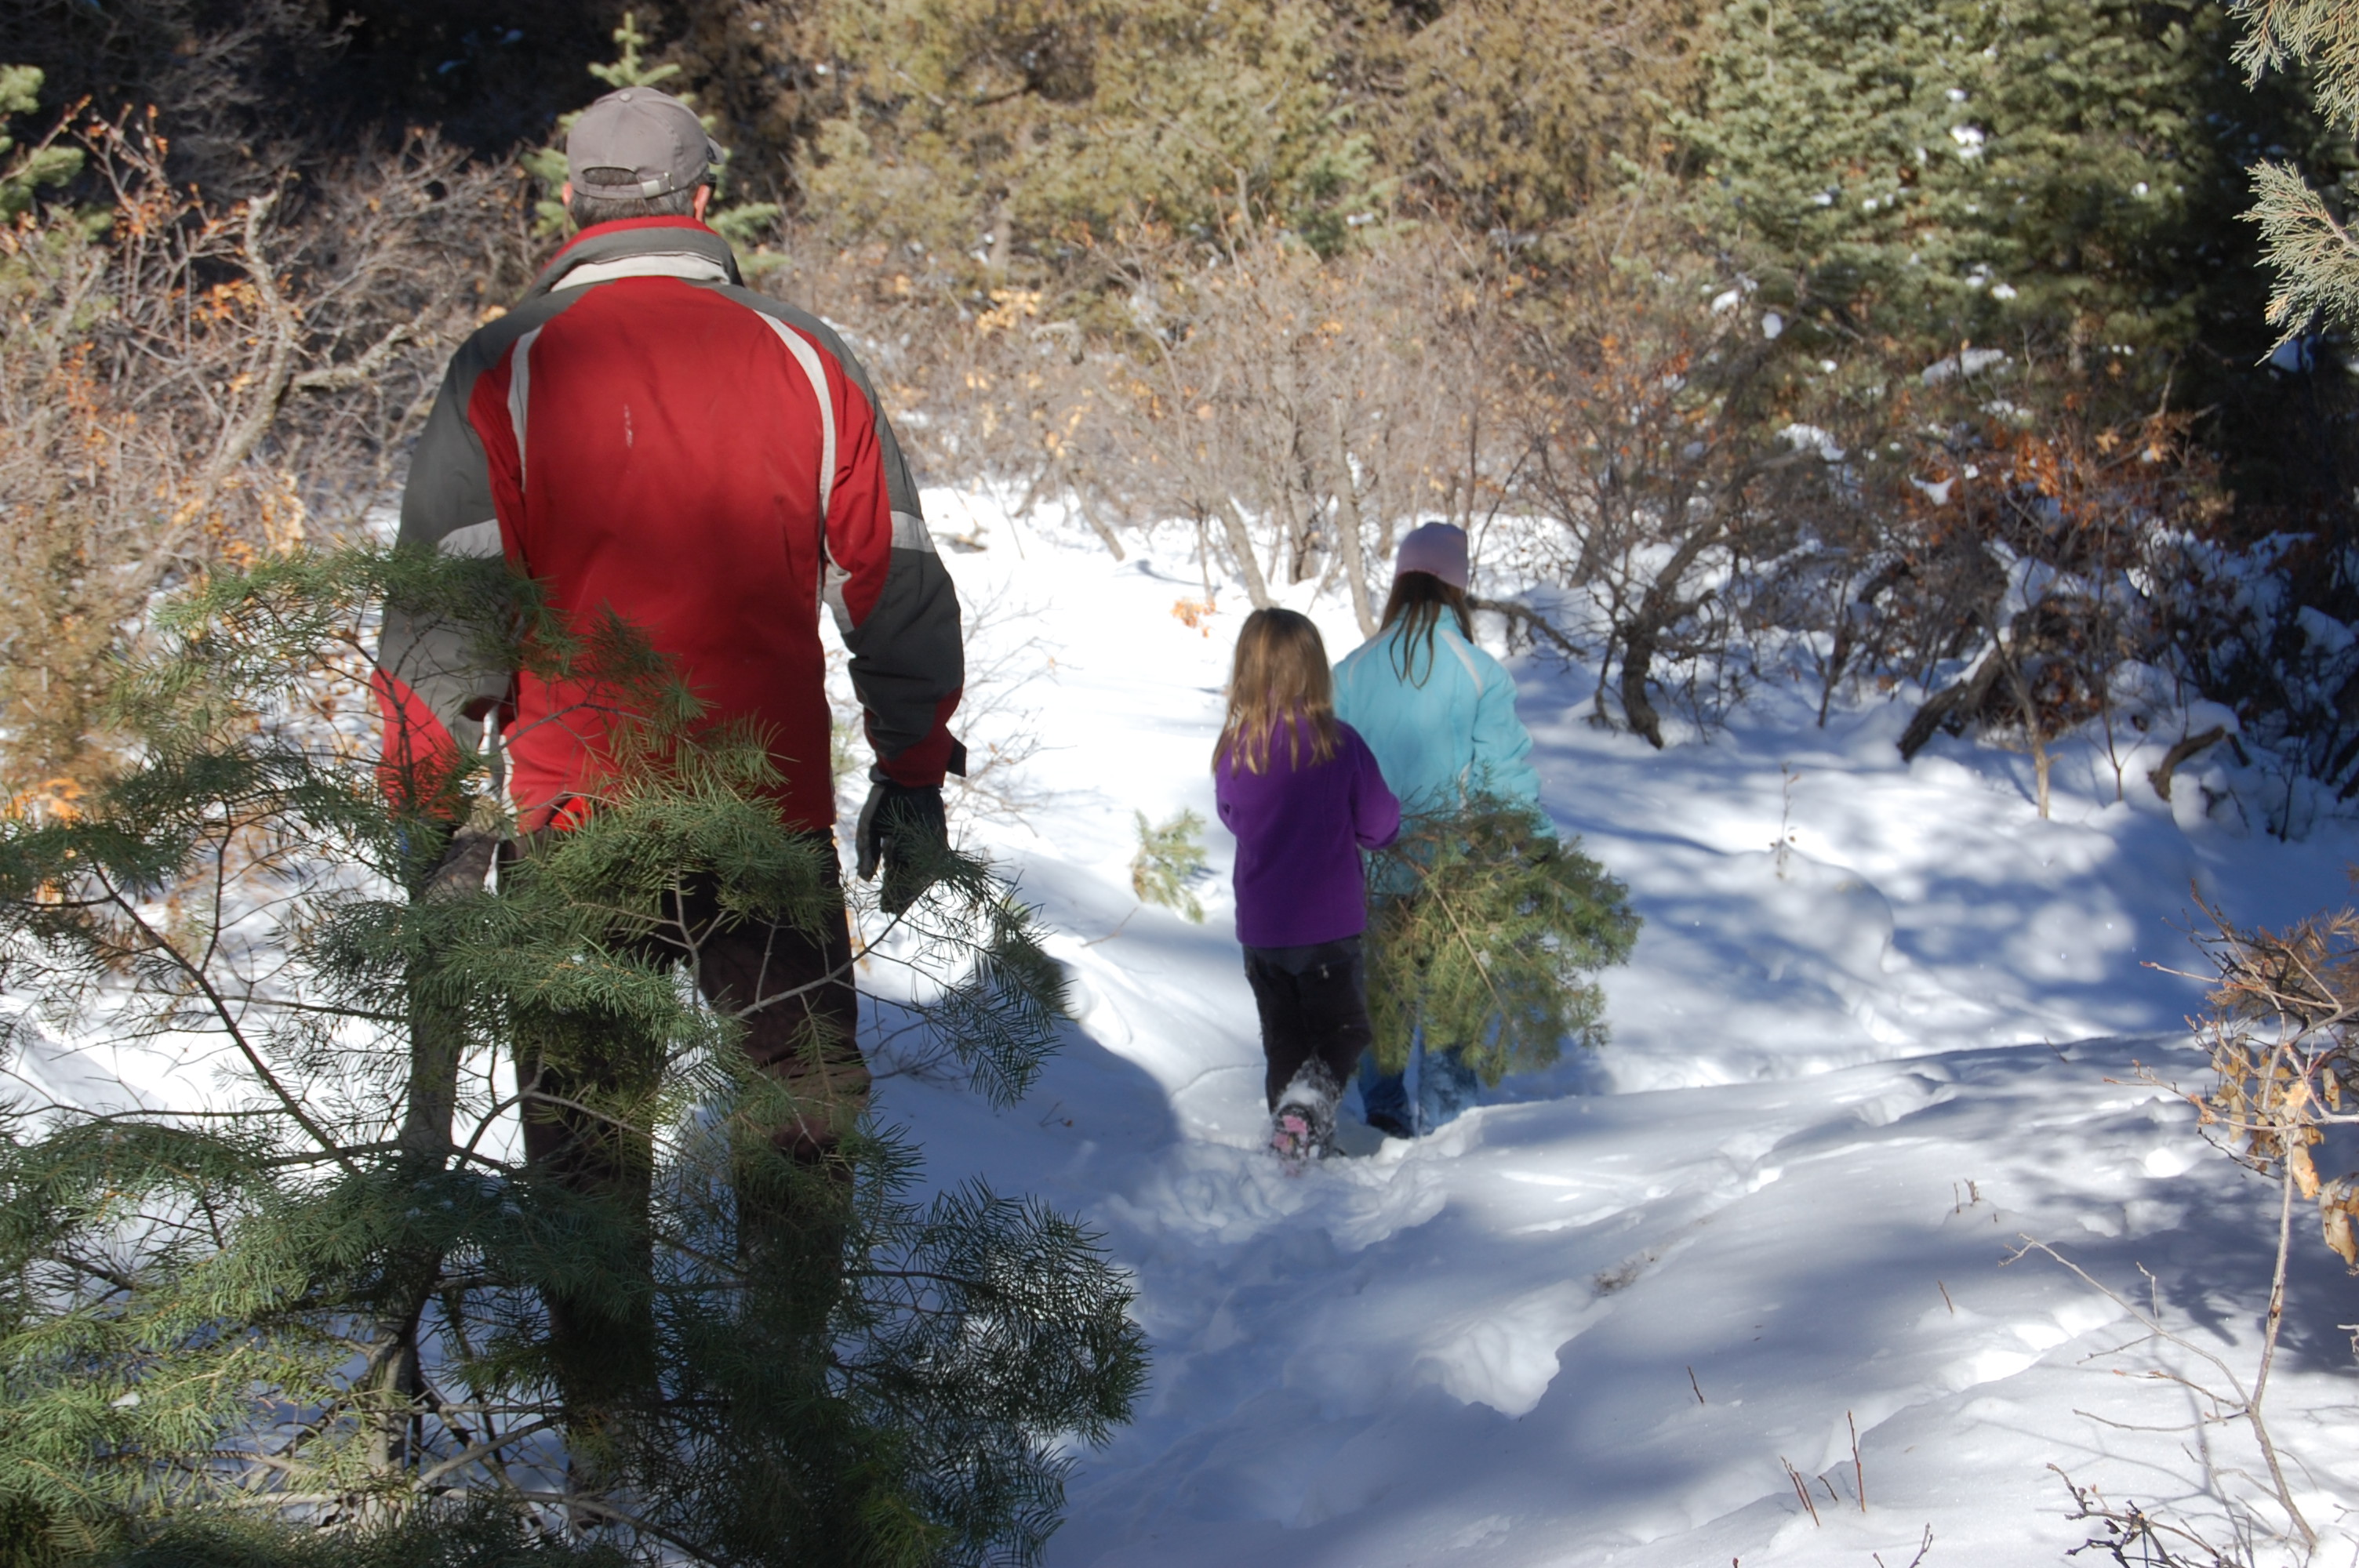 Two girls carry a small Christmas woods on a snow packed trail. A man follows dragging a larger tree